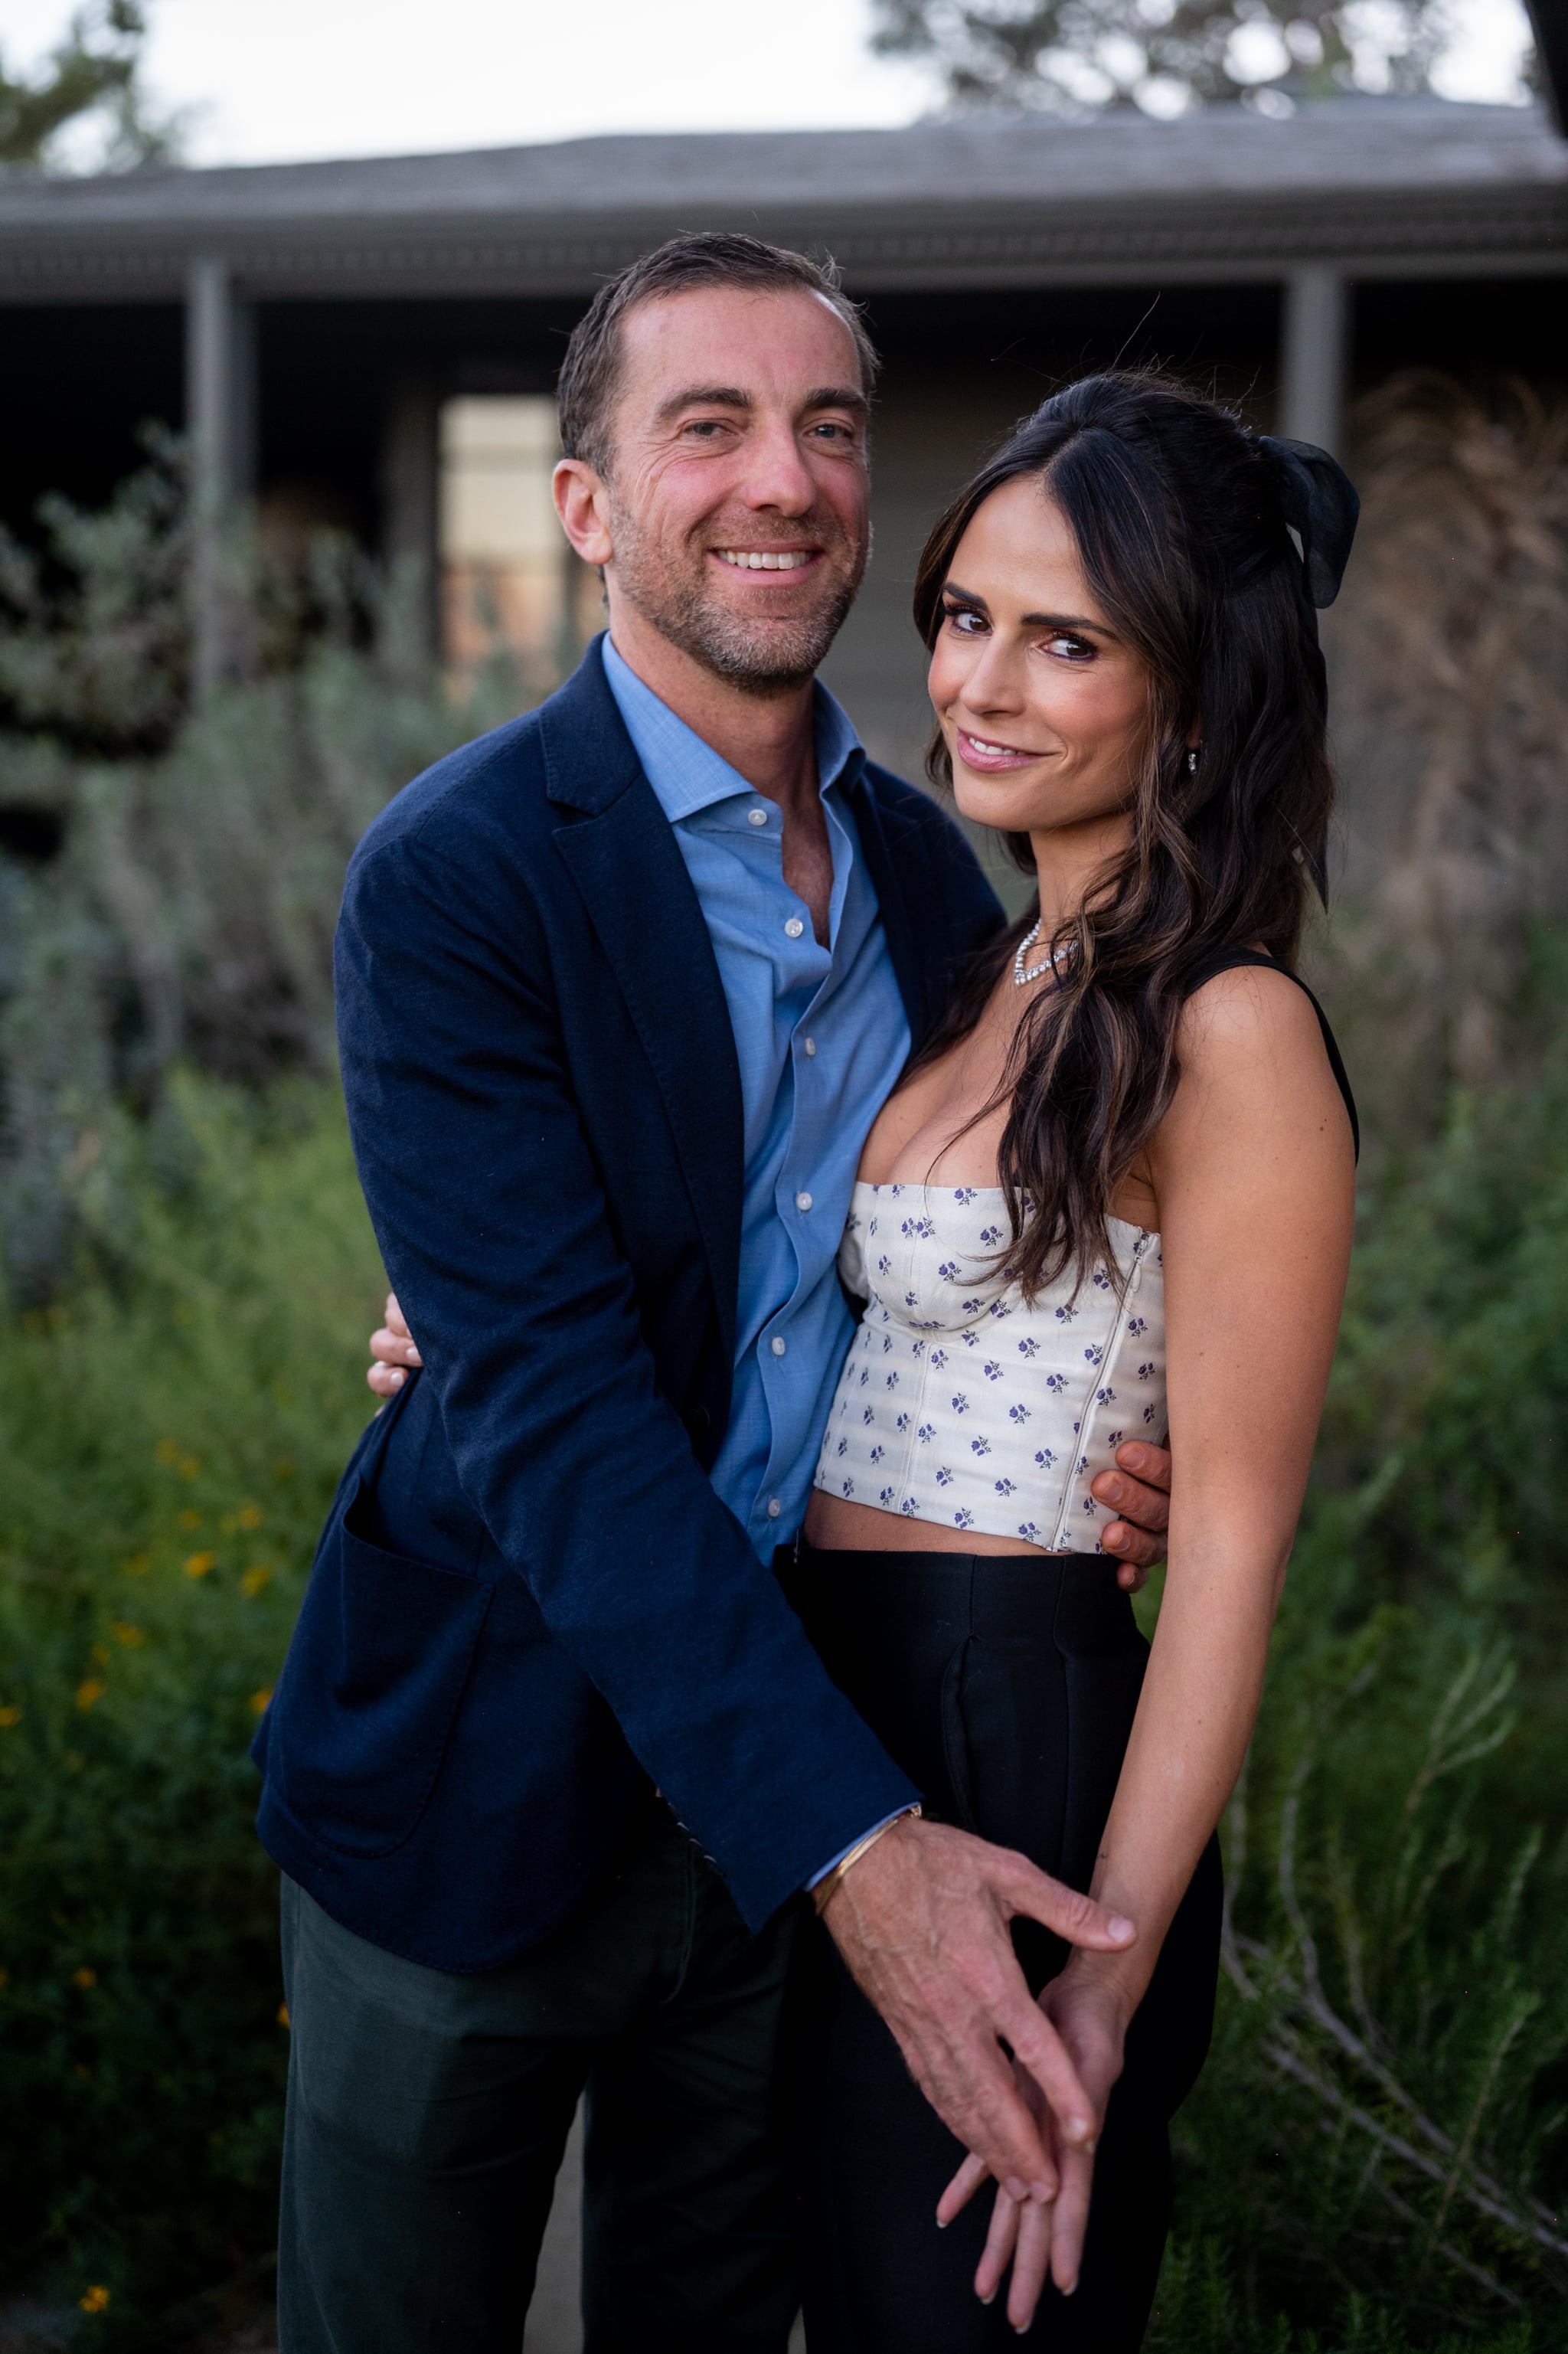 LOS ANGELES, CALIFORNIA - OCTOBER 27: Mason Morfit and Jordana Brewster attend TheRetaility.com dinner honoring Jordana Brewster in collaboration with Apeel, Bragg, and Landmark Vineyards at a private residence on October 27, 2021 in Los Angeles, California.  (Photo by Emma McIntyre/Getty Images for for TheRetaility.com)